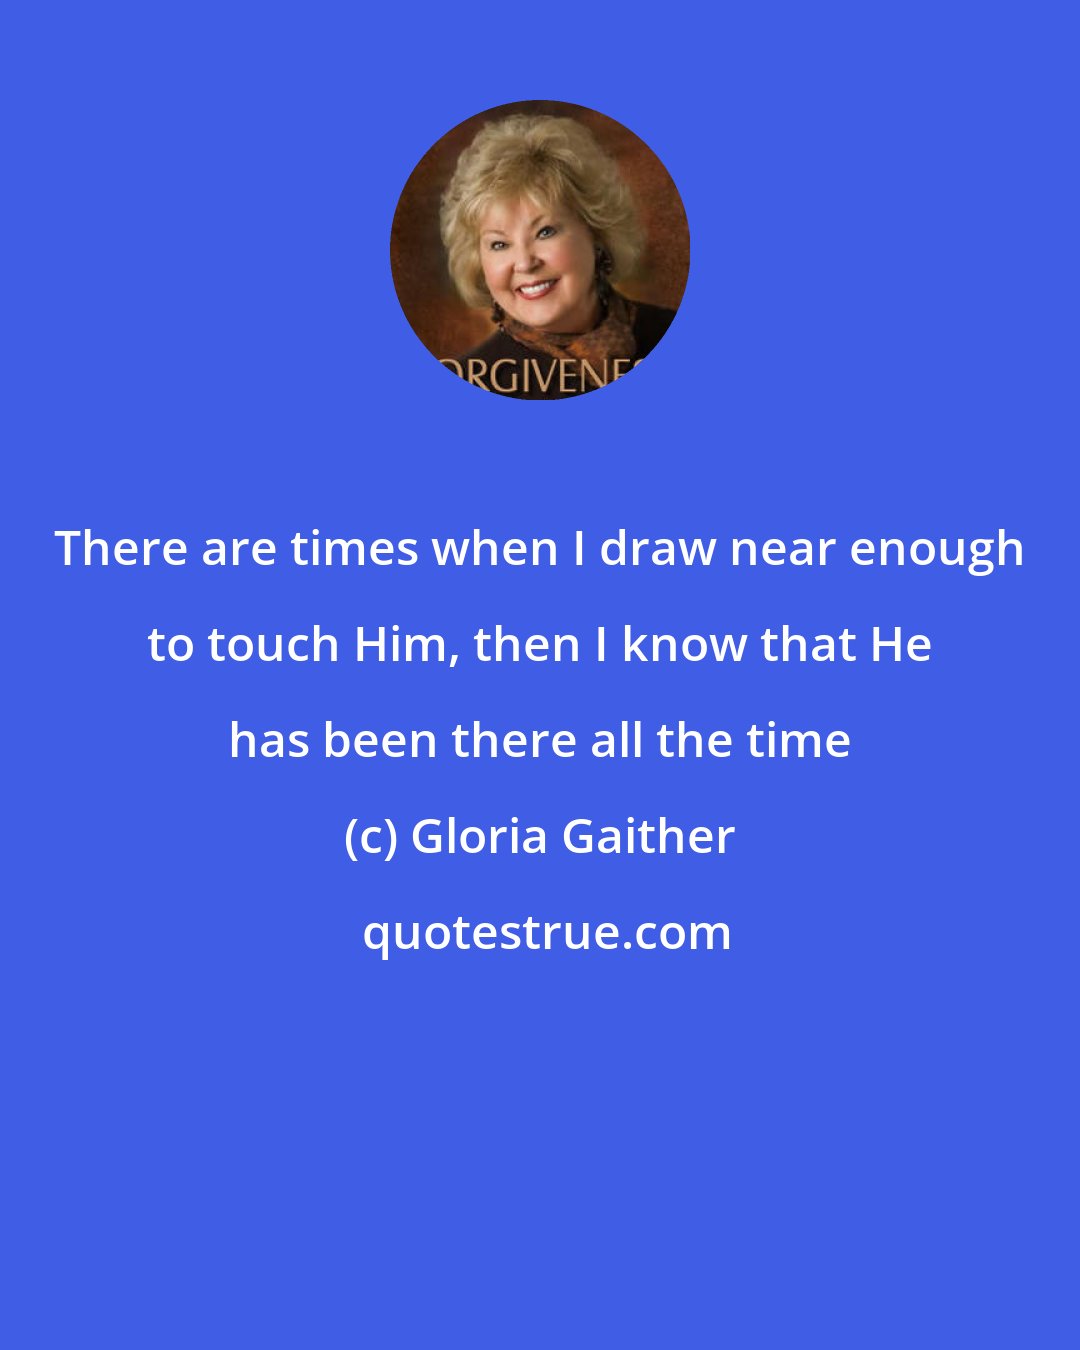 Gloria Gaither: There are times when I draw near enough to touch Him, then I know that He has been there all the time